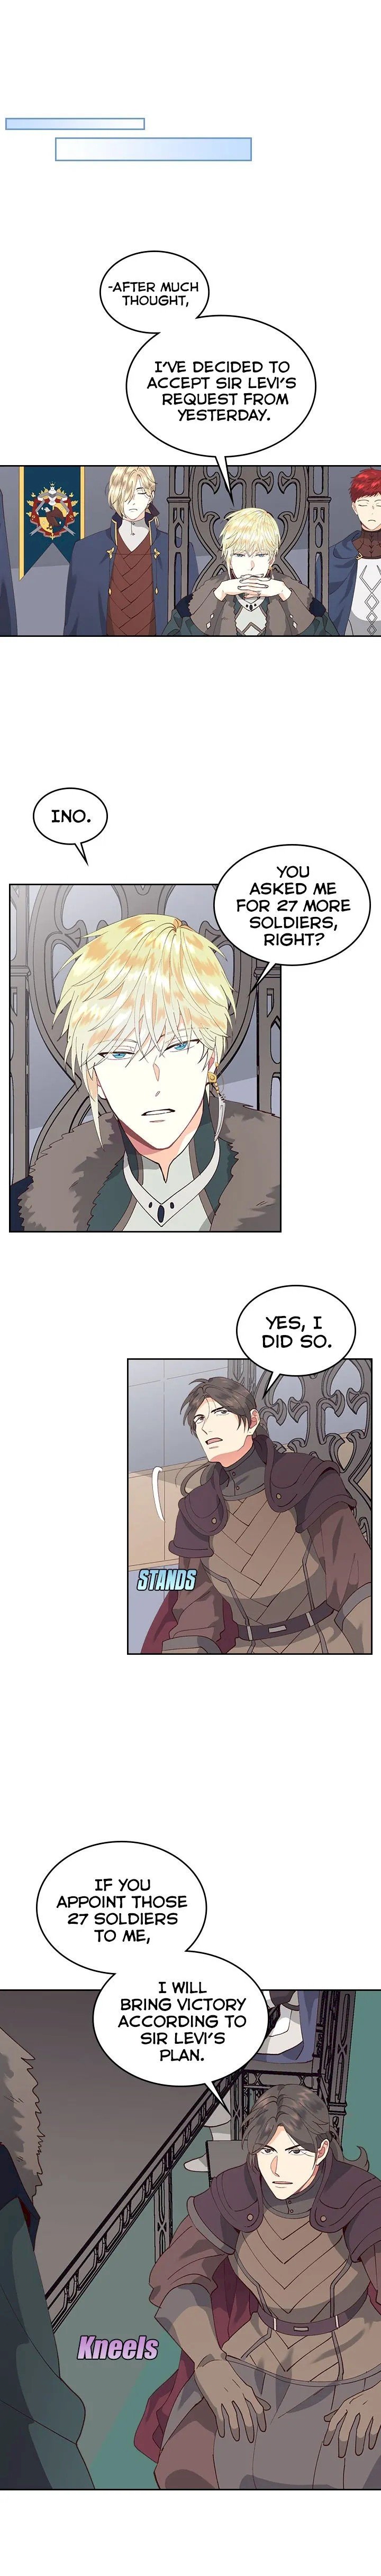 emperor-and-the-female-knight-chap-39-5